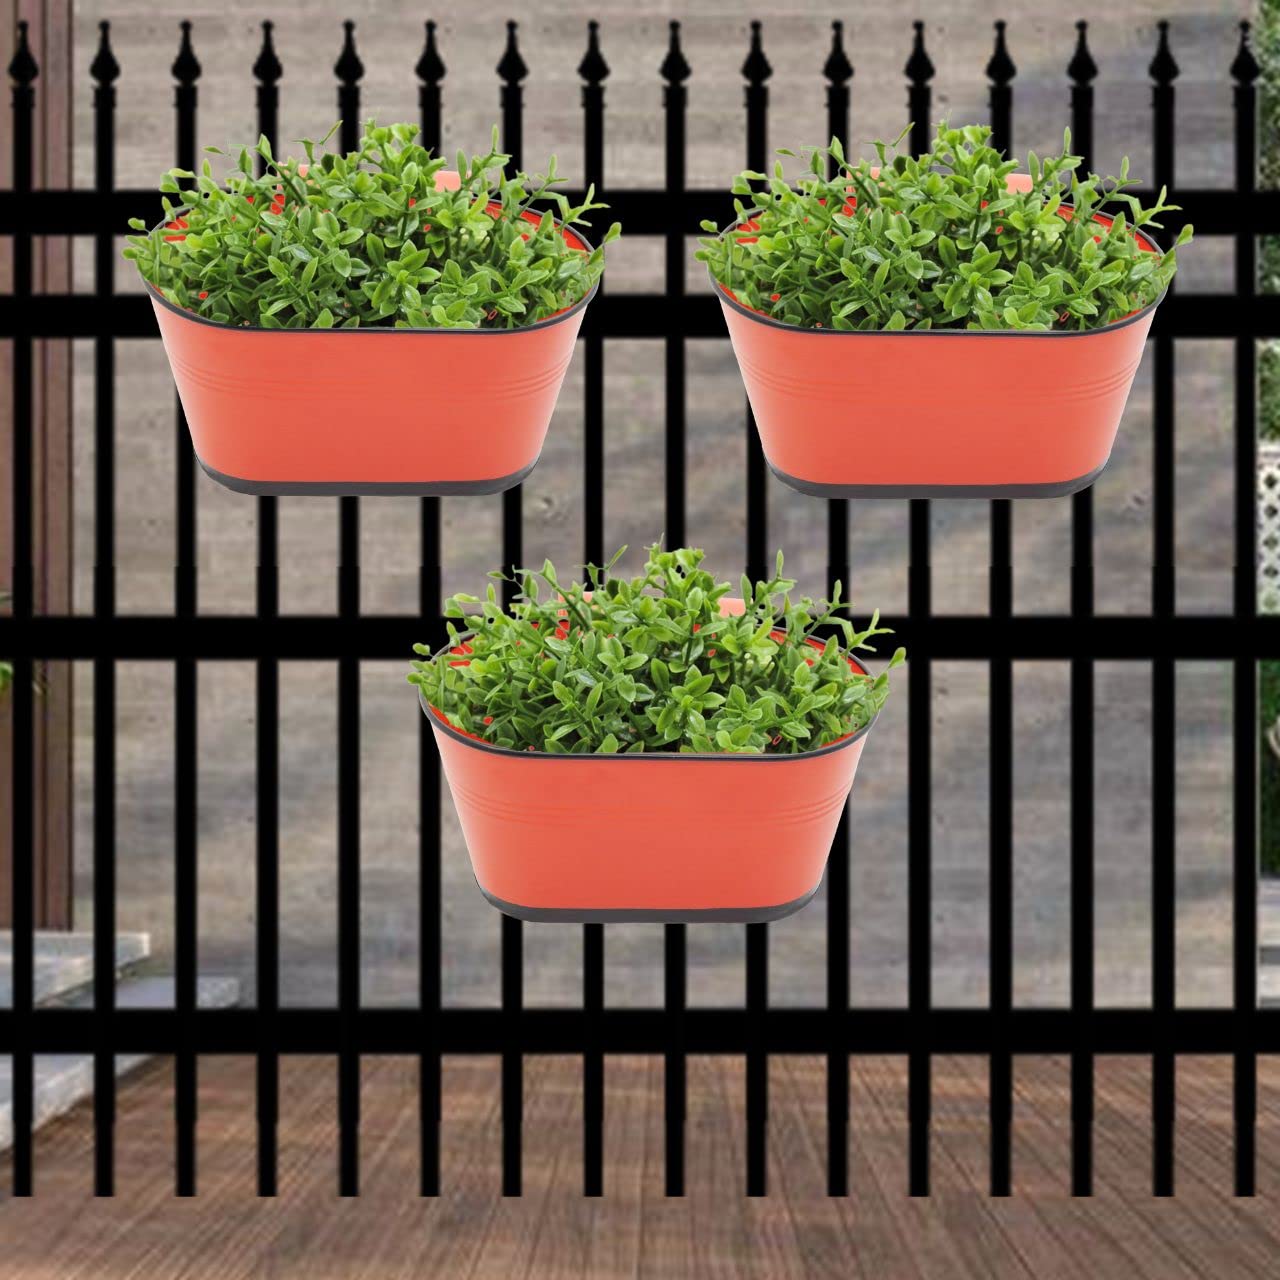 Oval Red 10 inches Balcony Railing Planter (Set of 3)